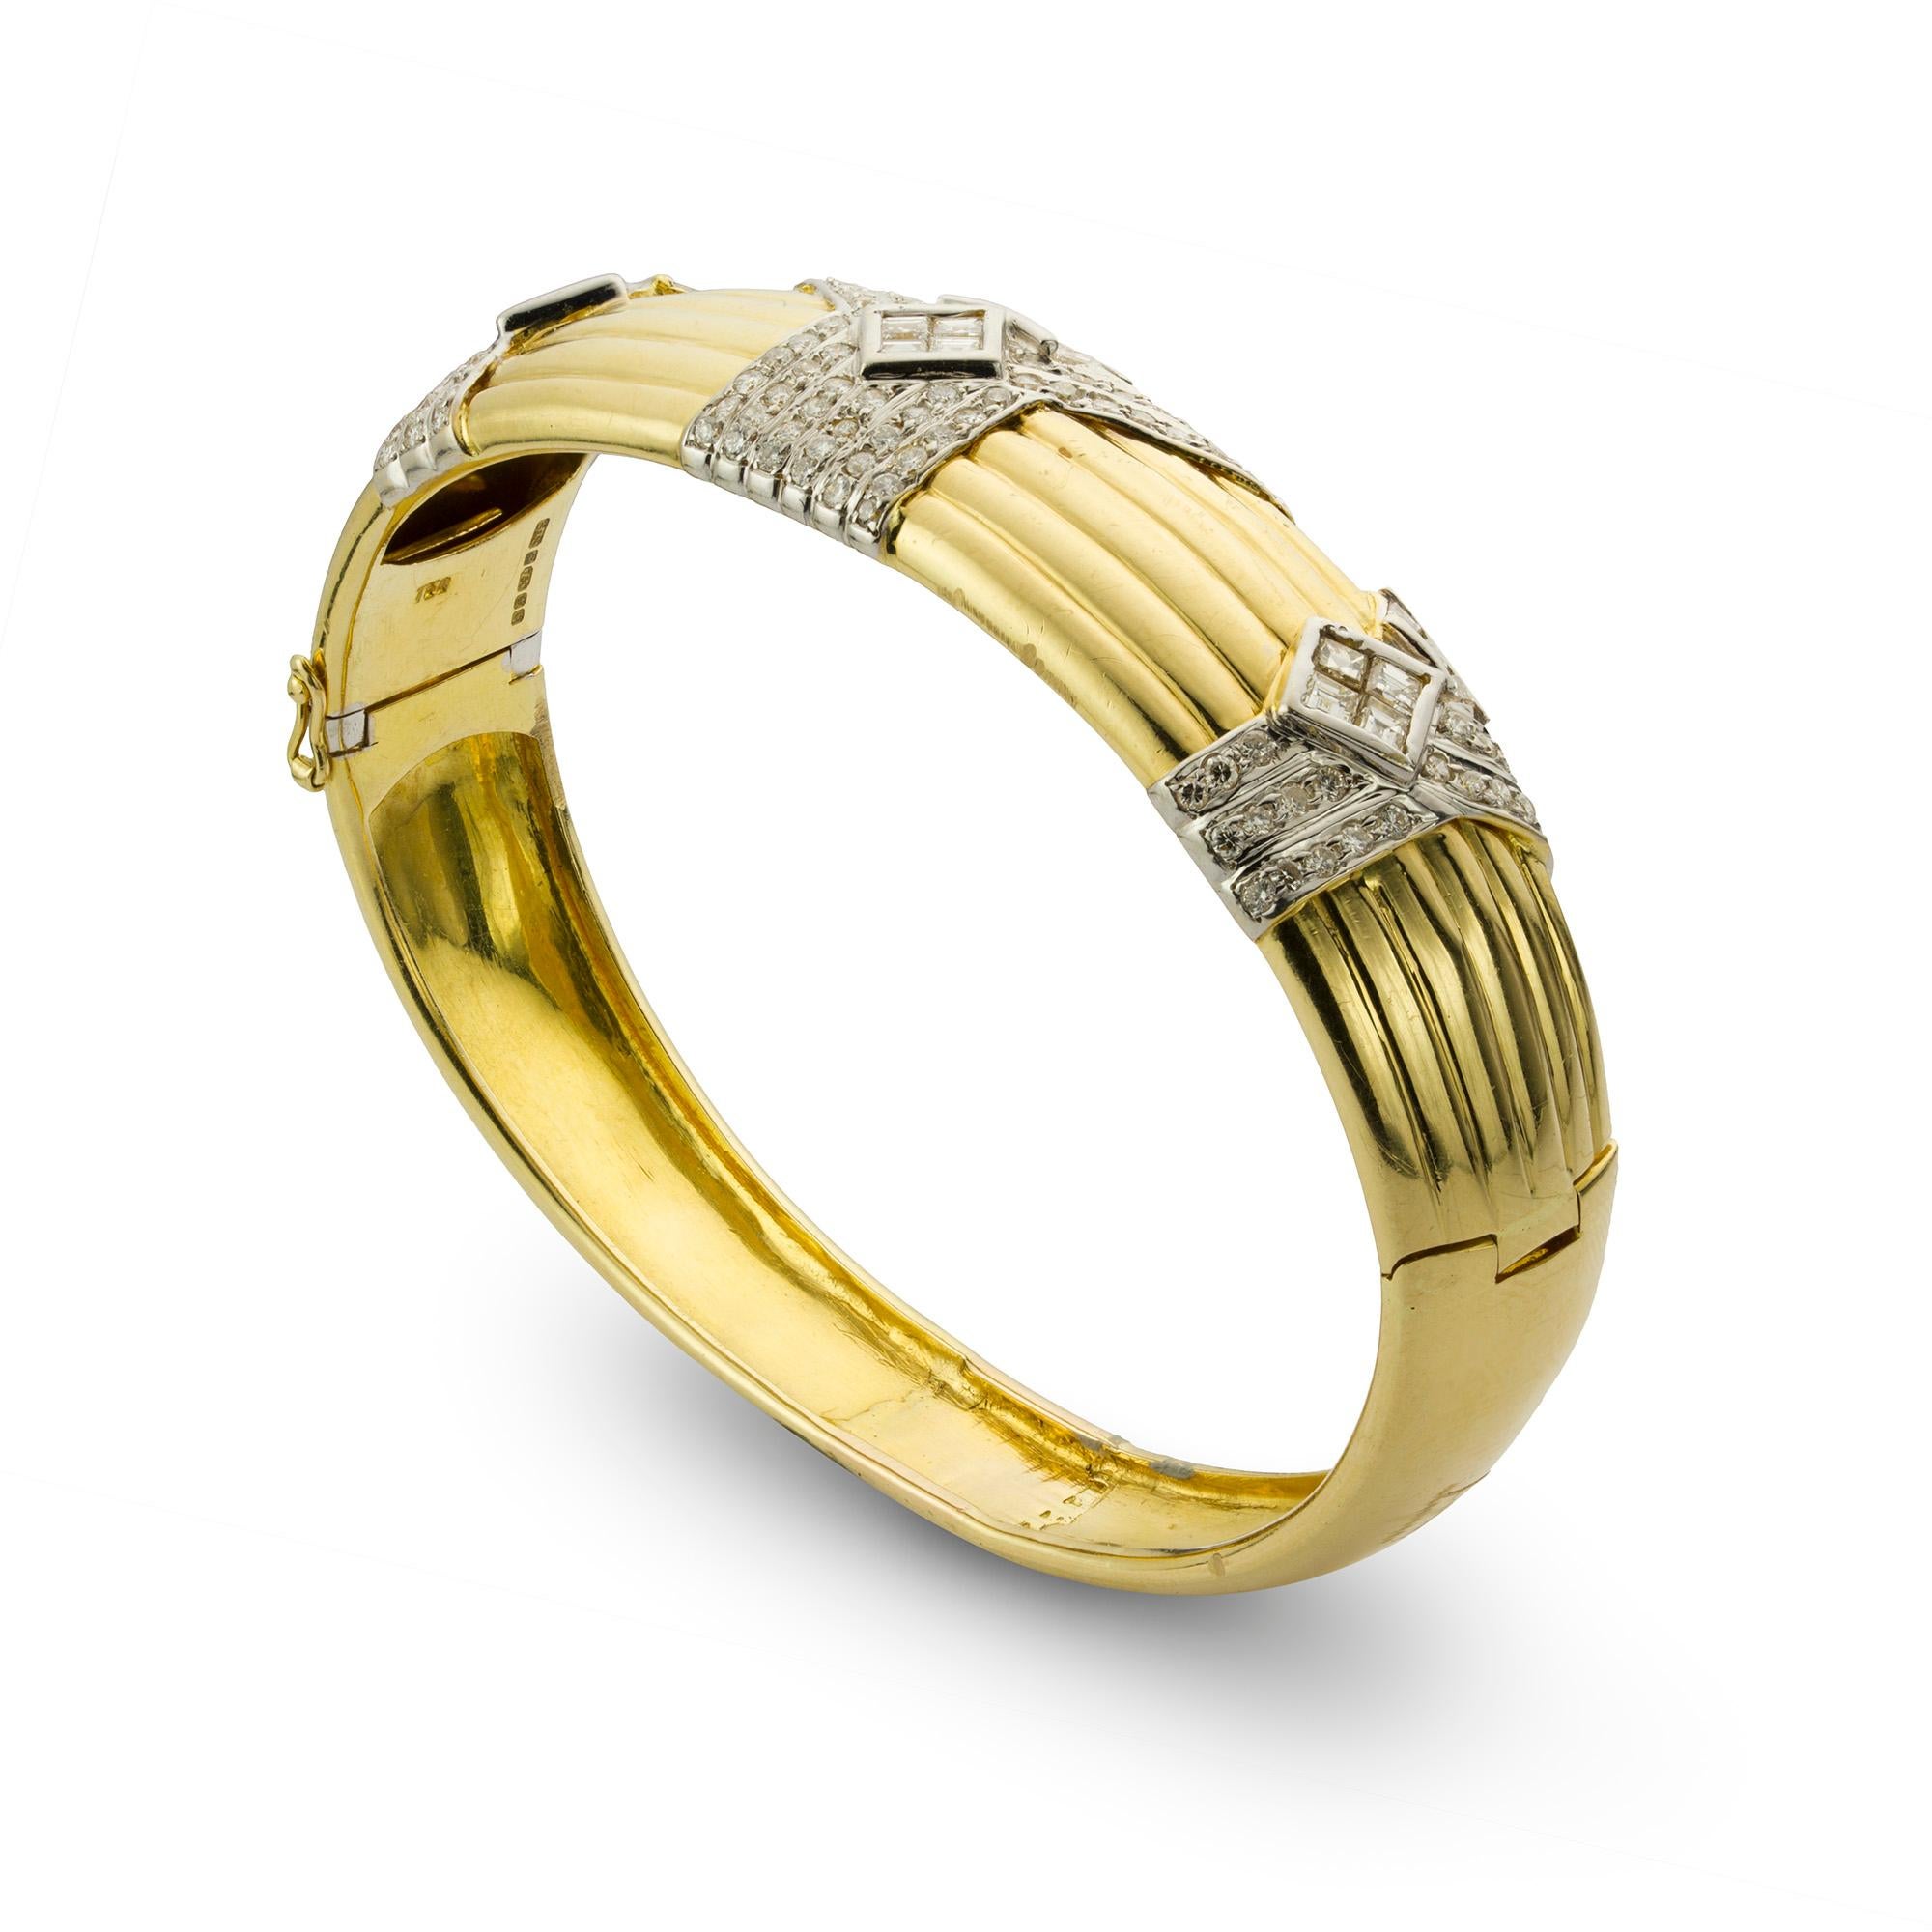 A diamond set 18ct yellow gold ribbed bangle, to the centre a diamond set spray detail with round brilliant-cut, square-cut and baguette-cut diamonds each set in 18ct white gold between two further diamond set sections leading to a plain yellow gold